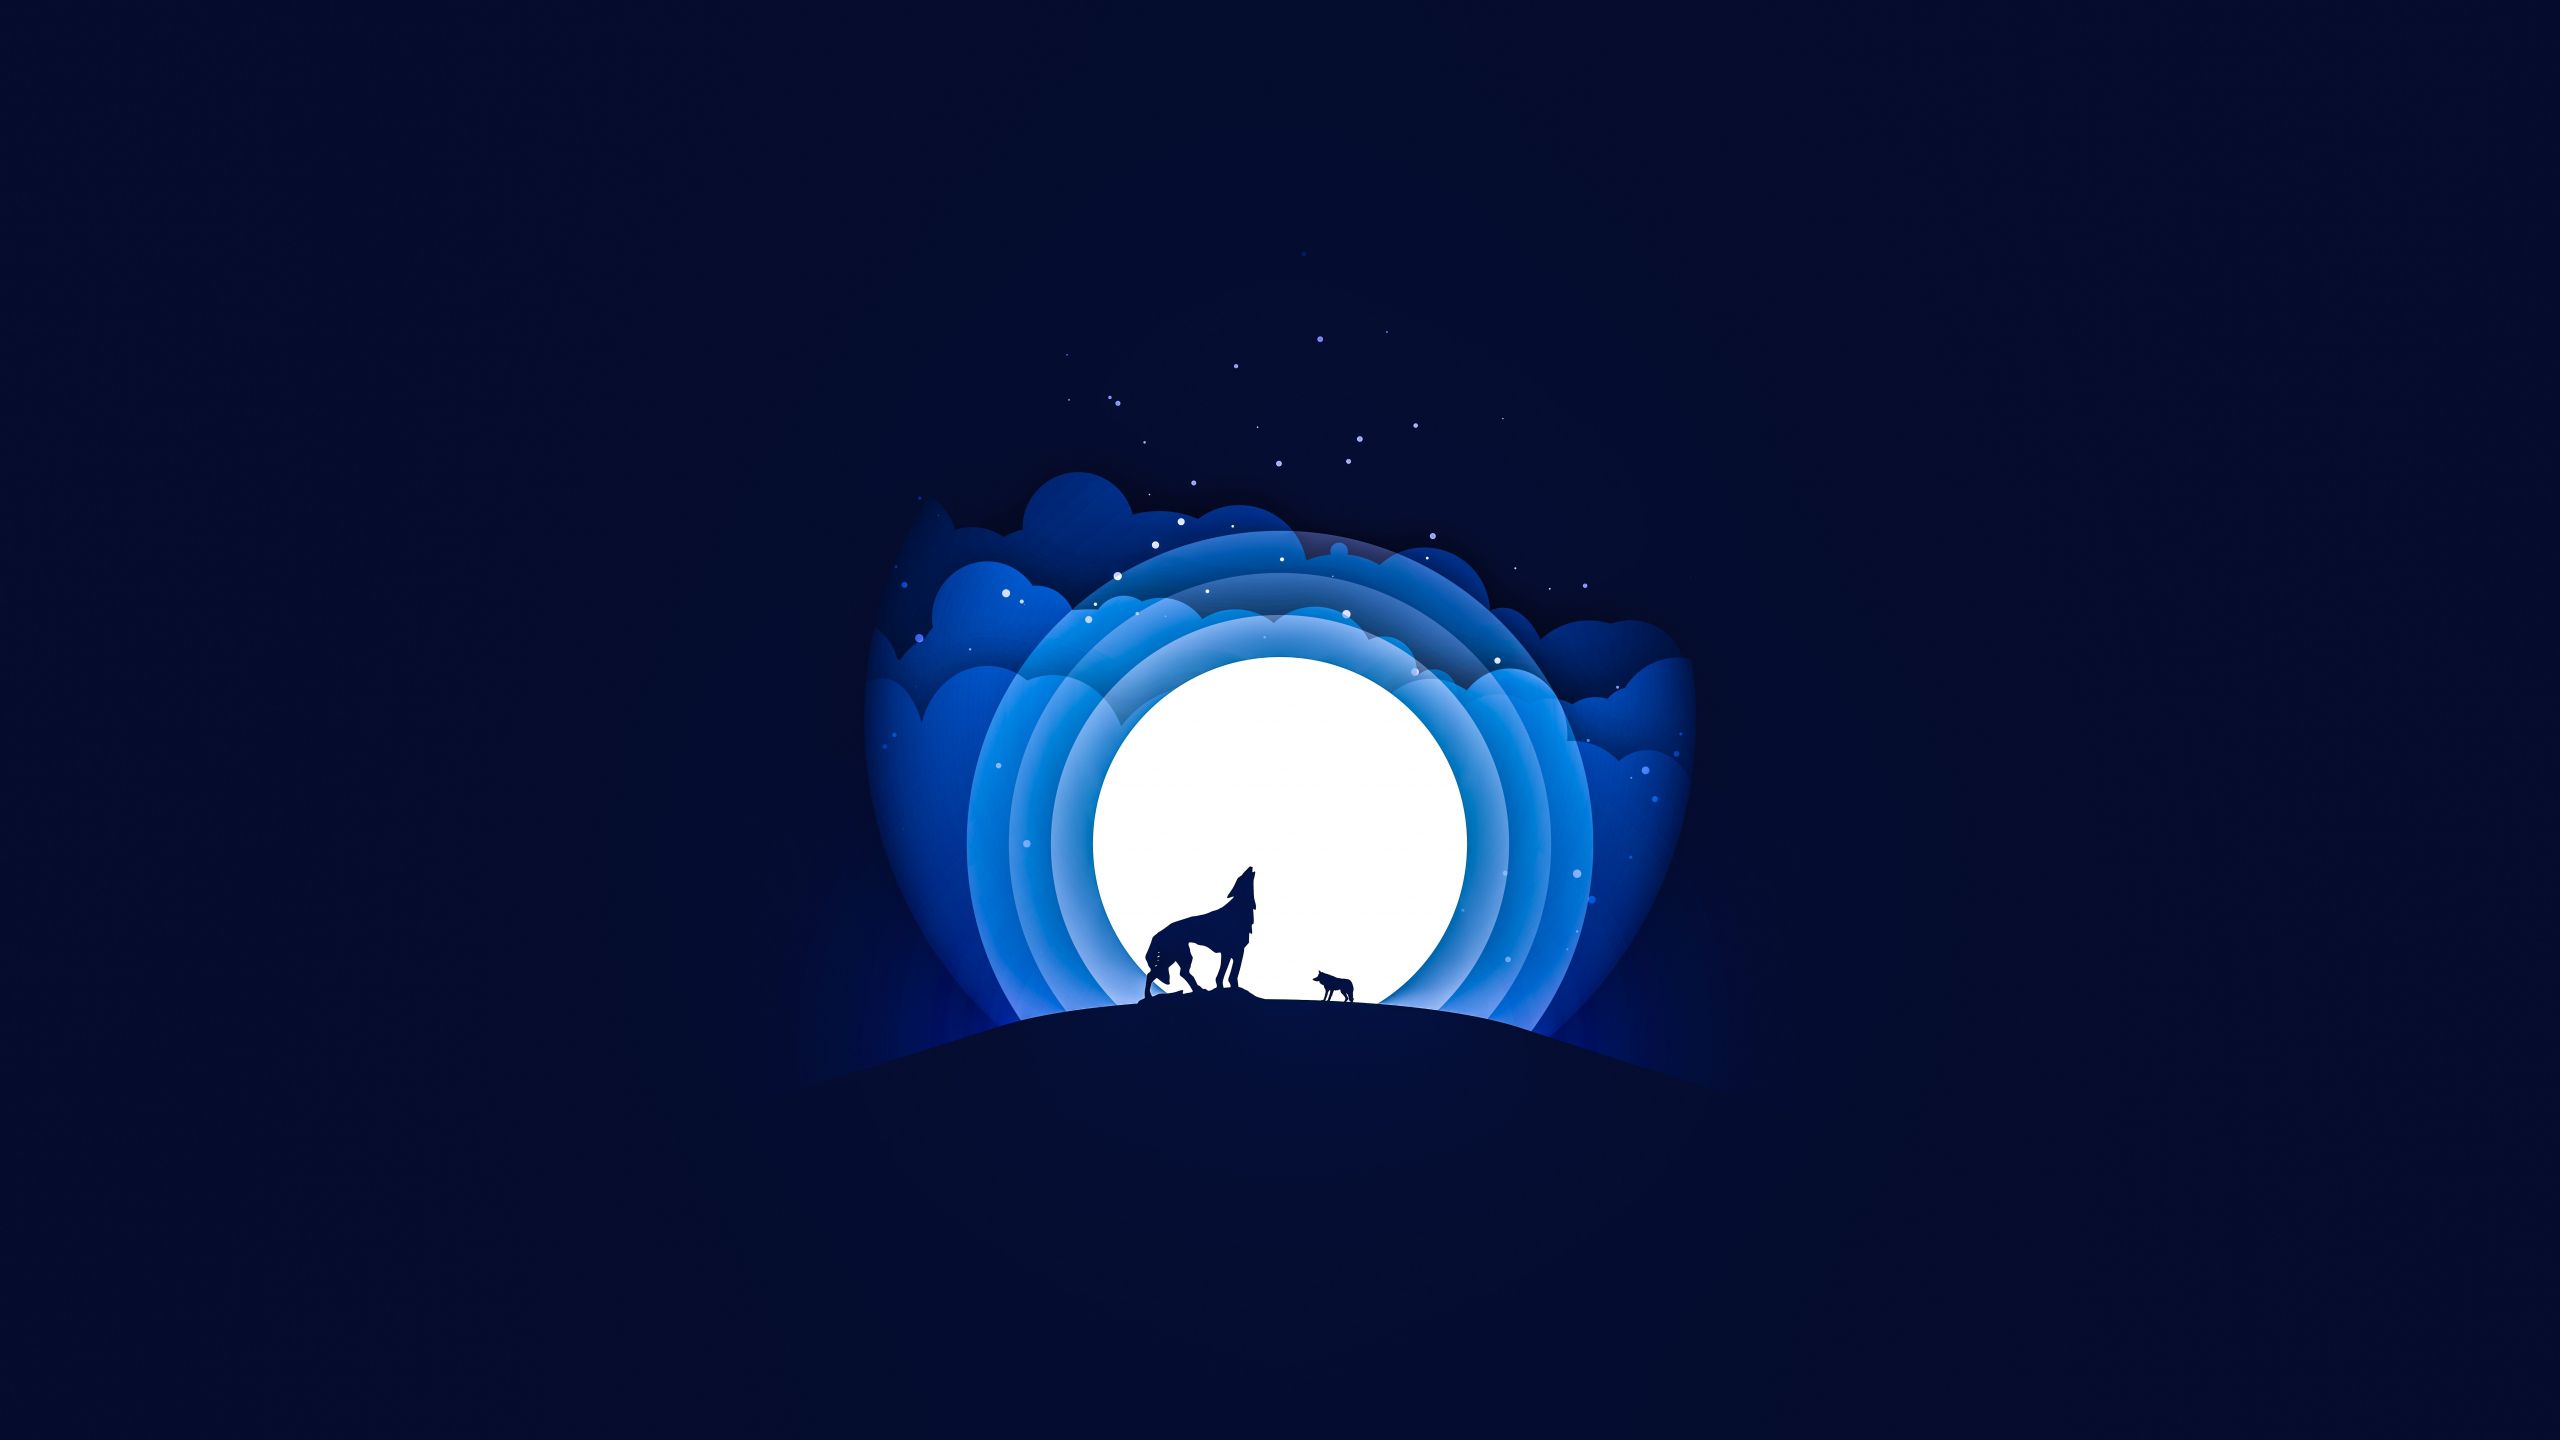 Download wallpaper 2560x1440 wolf, moon, howling, minimal, dual wide 16:9 2560x1440 HD background, 8193